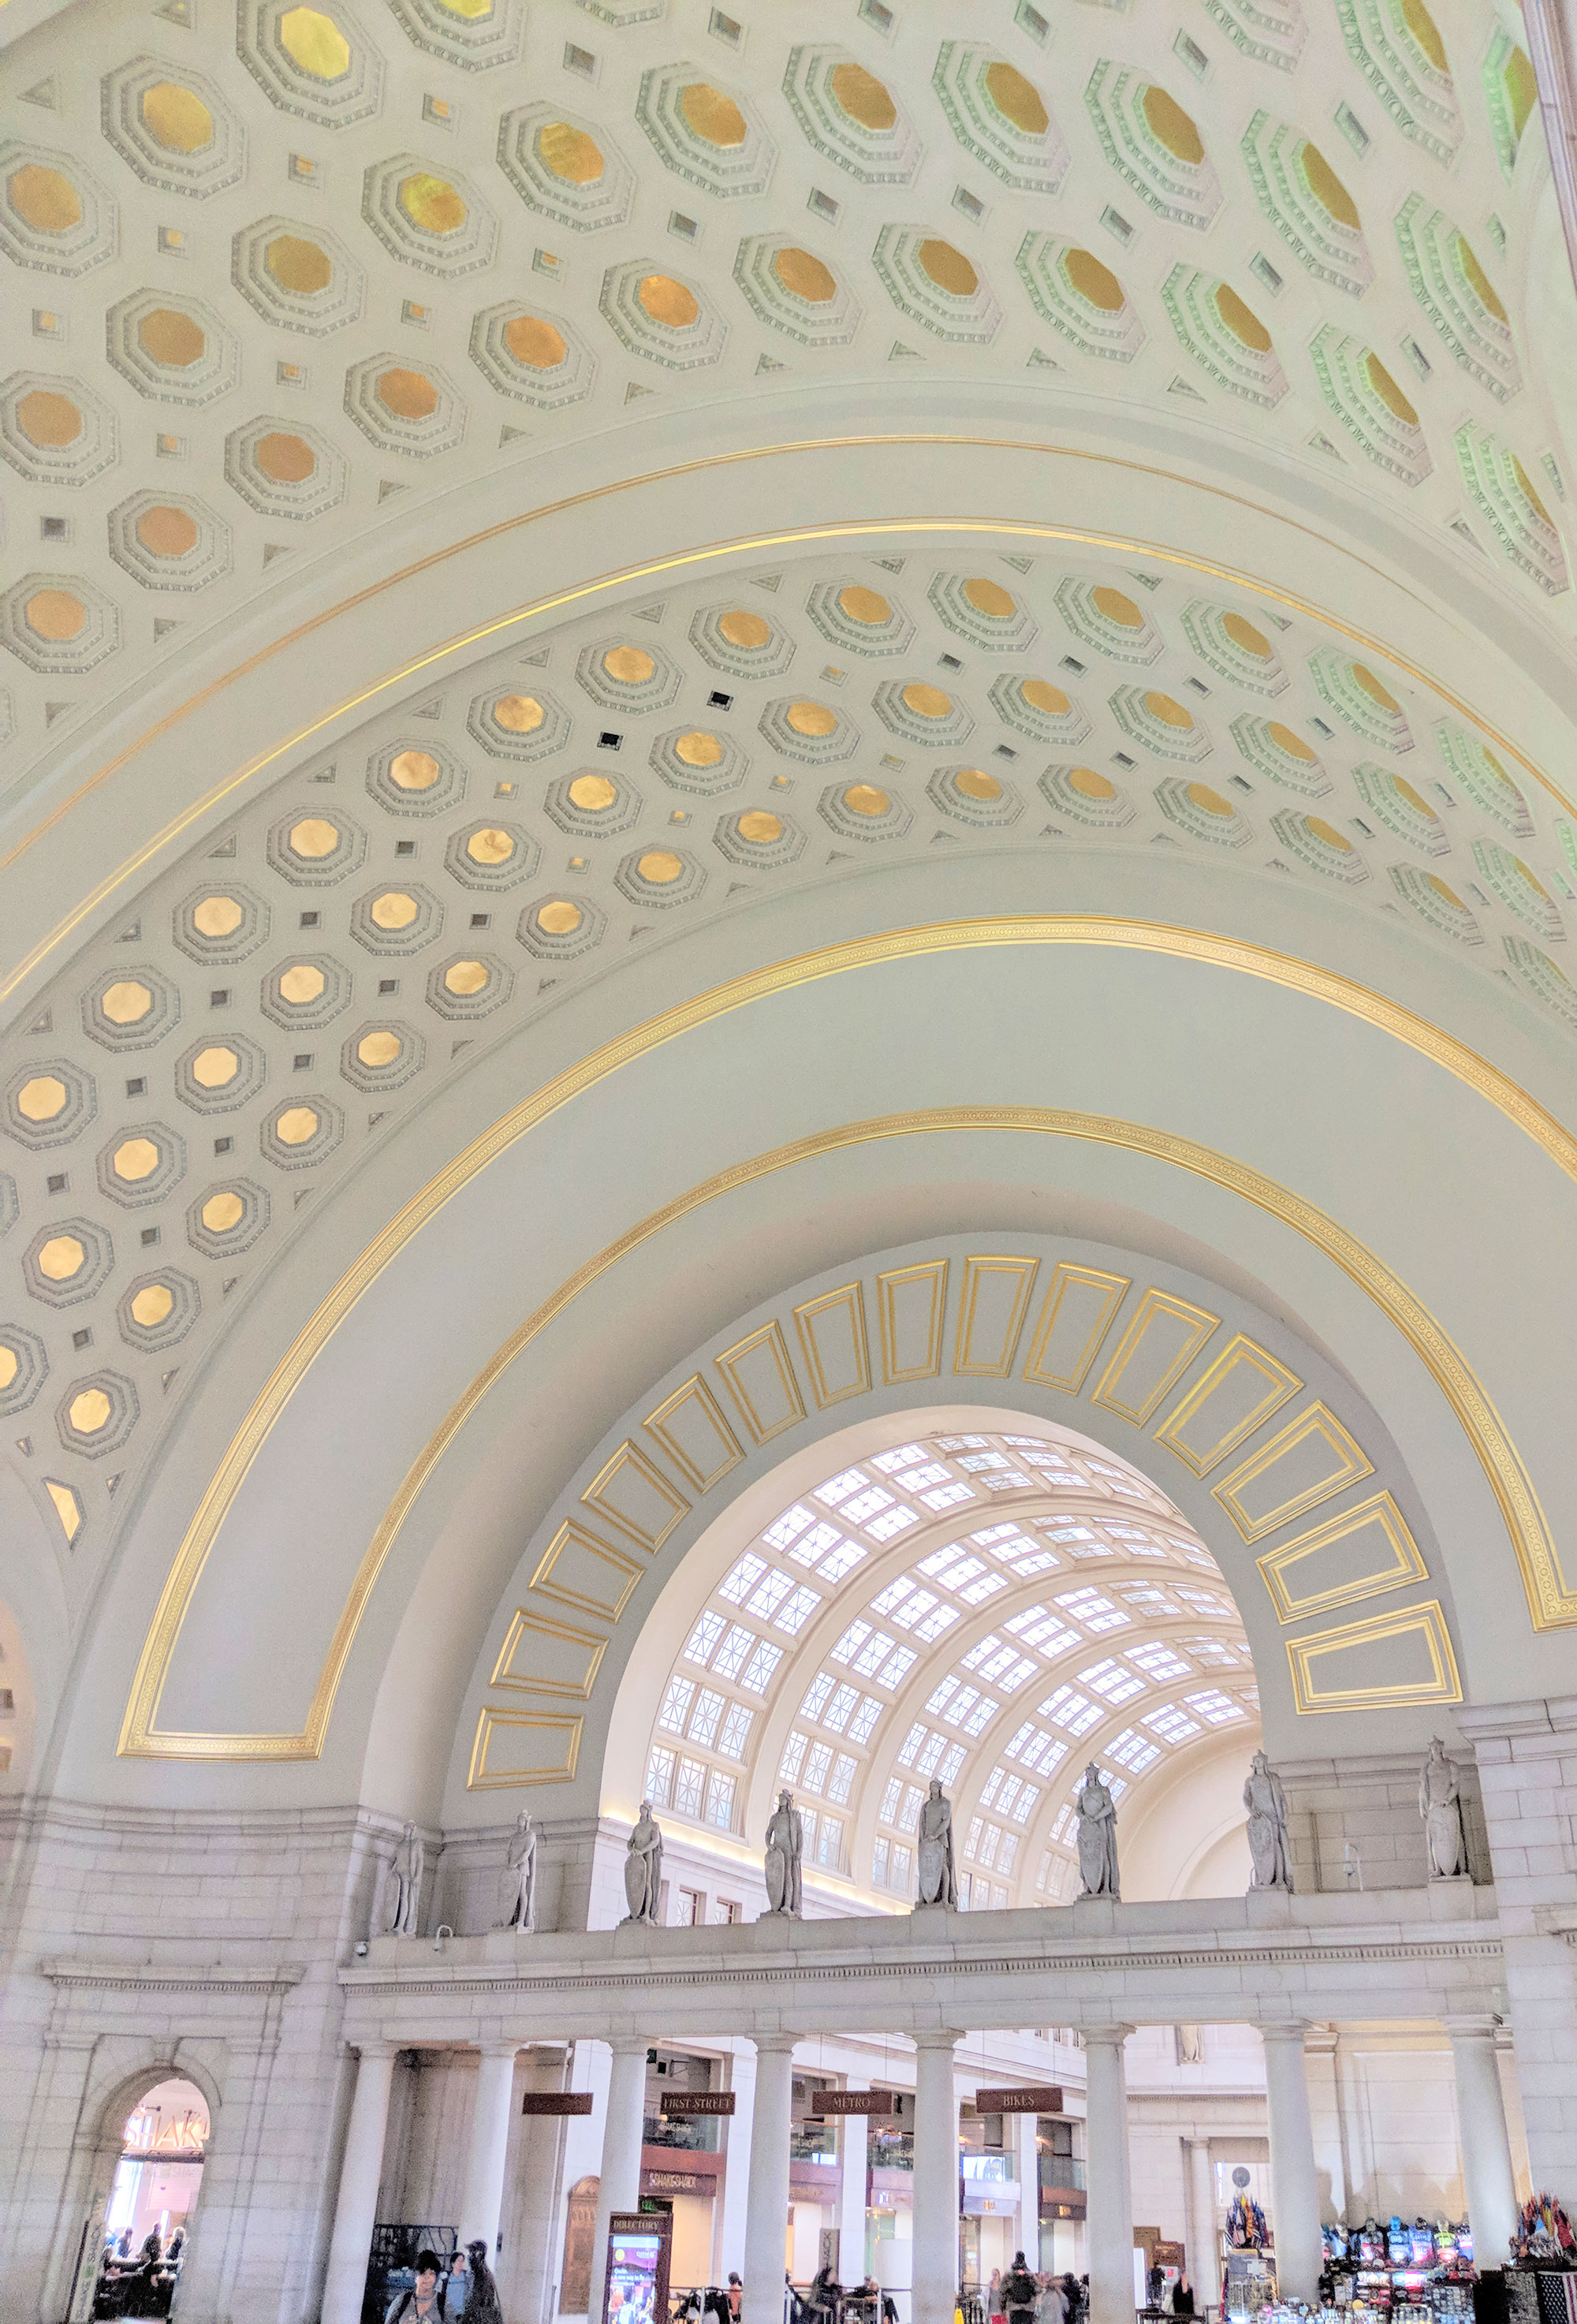 The ceiling of the main hall of Union Station.